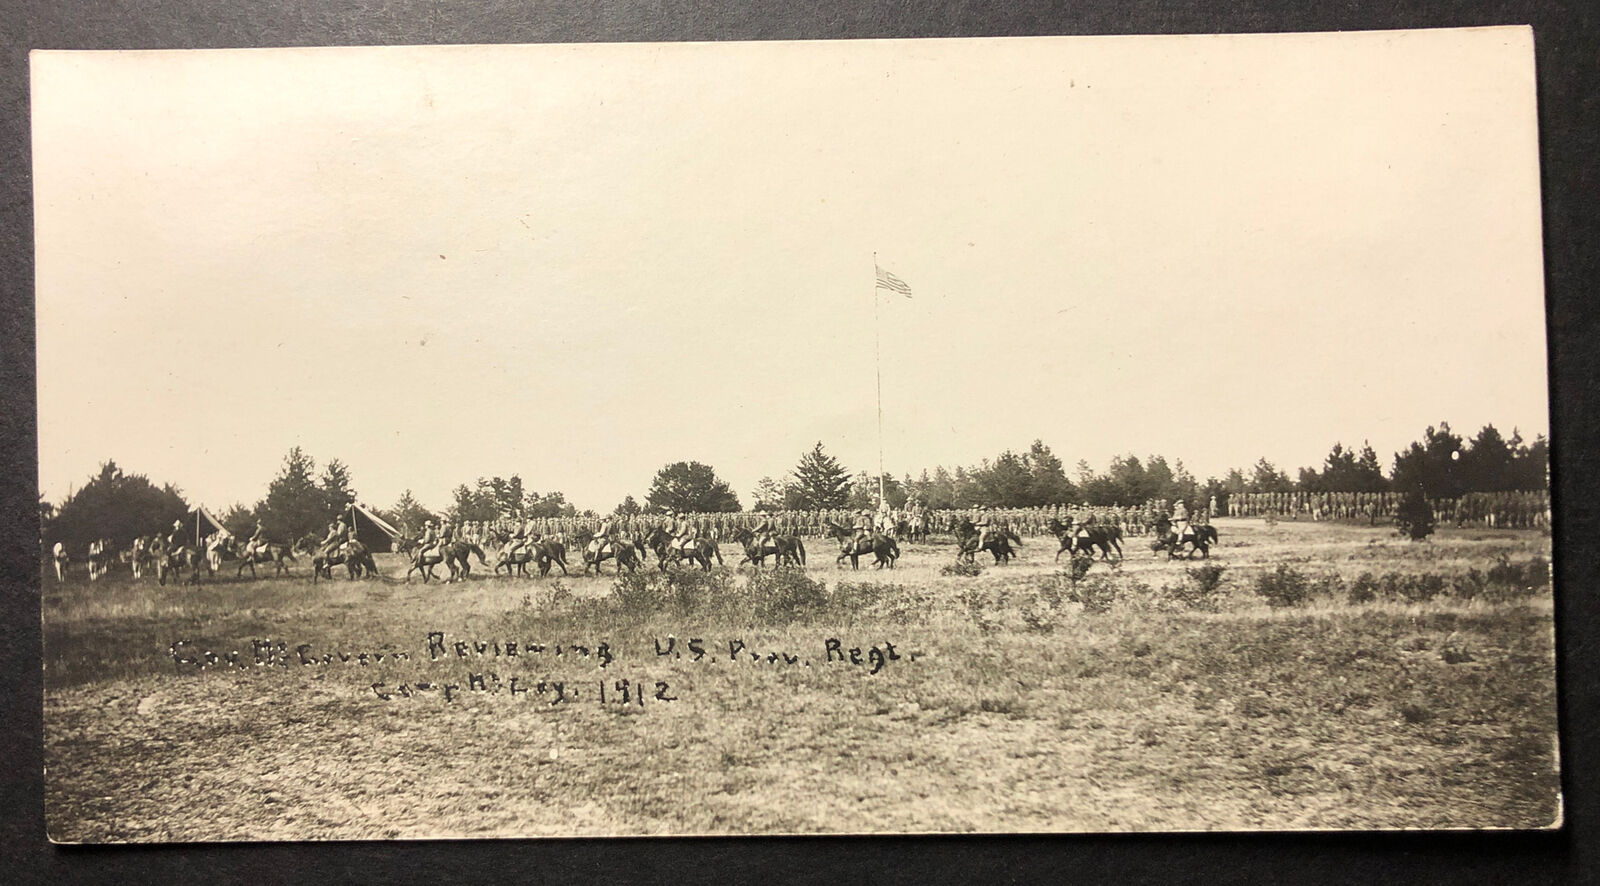 Gov McCoy Reviewing US Regt Camp McCoy 1912 Wisconsin RPPC extra wide